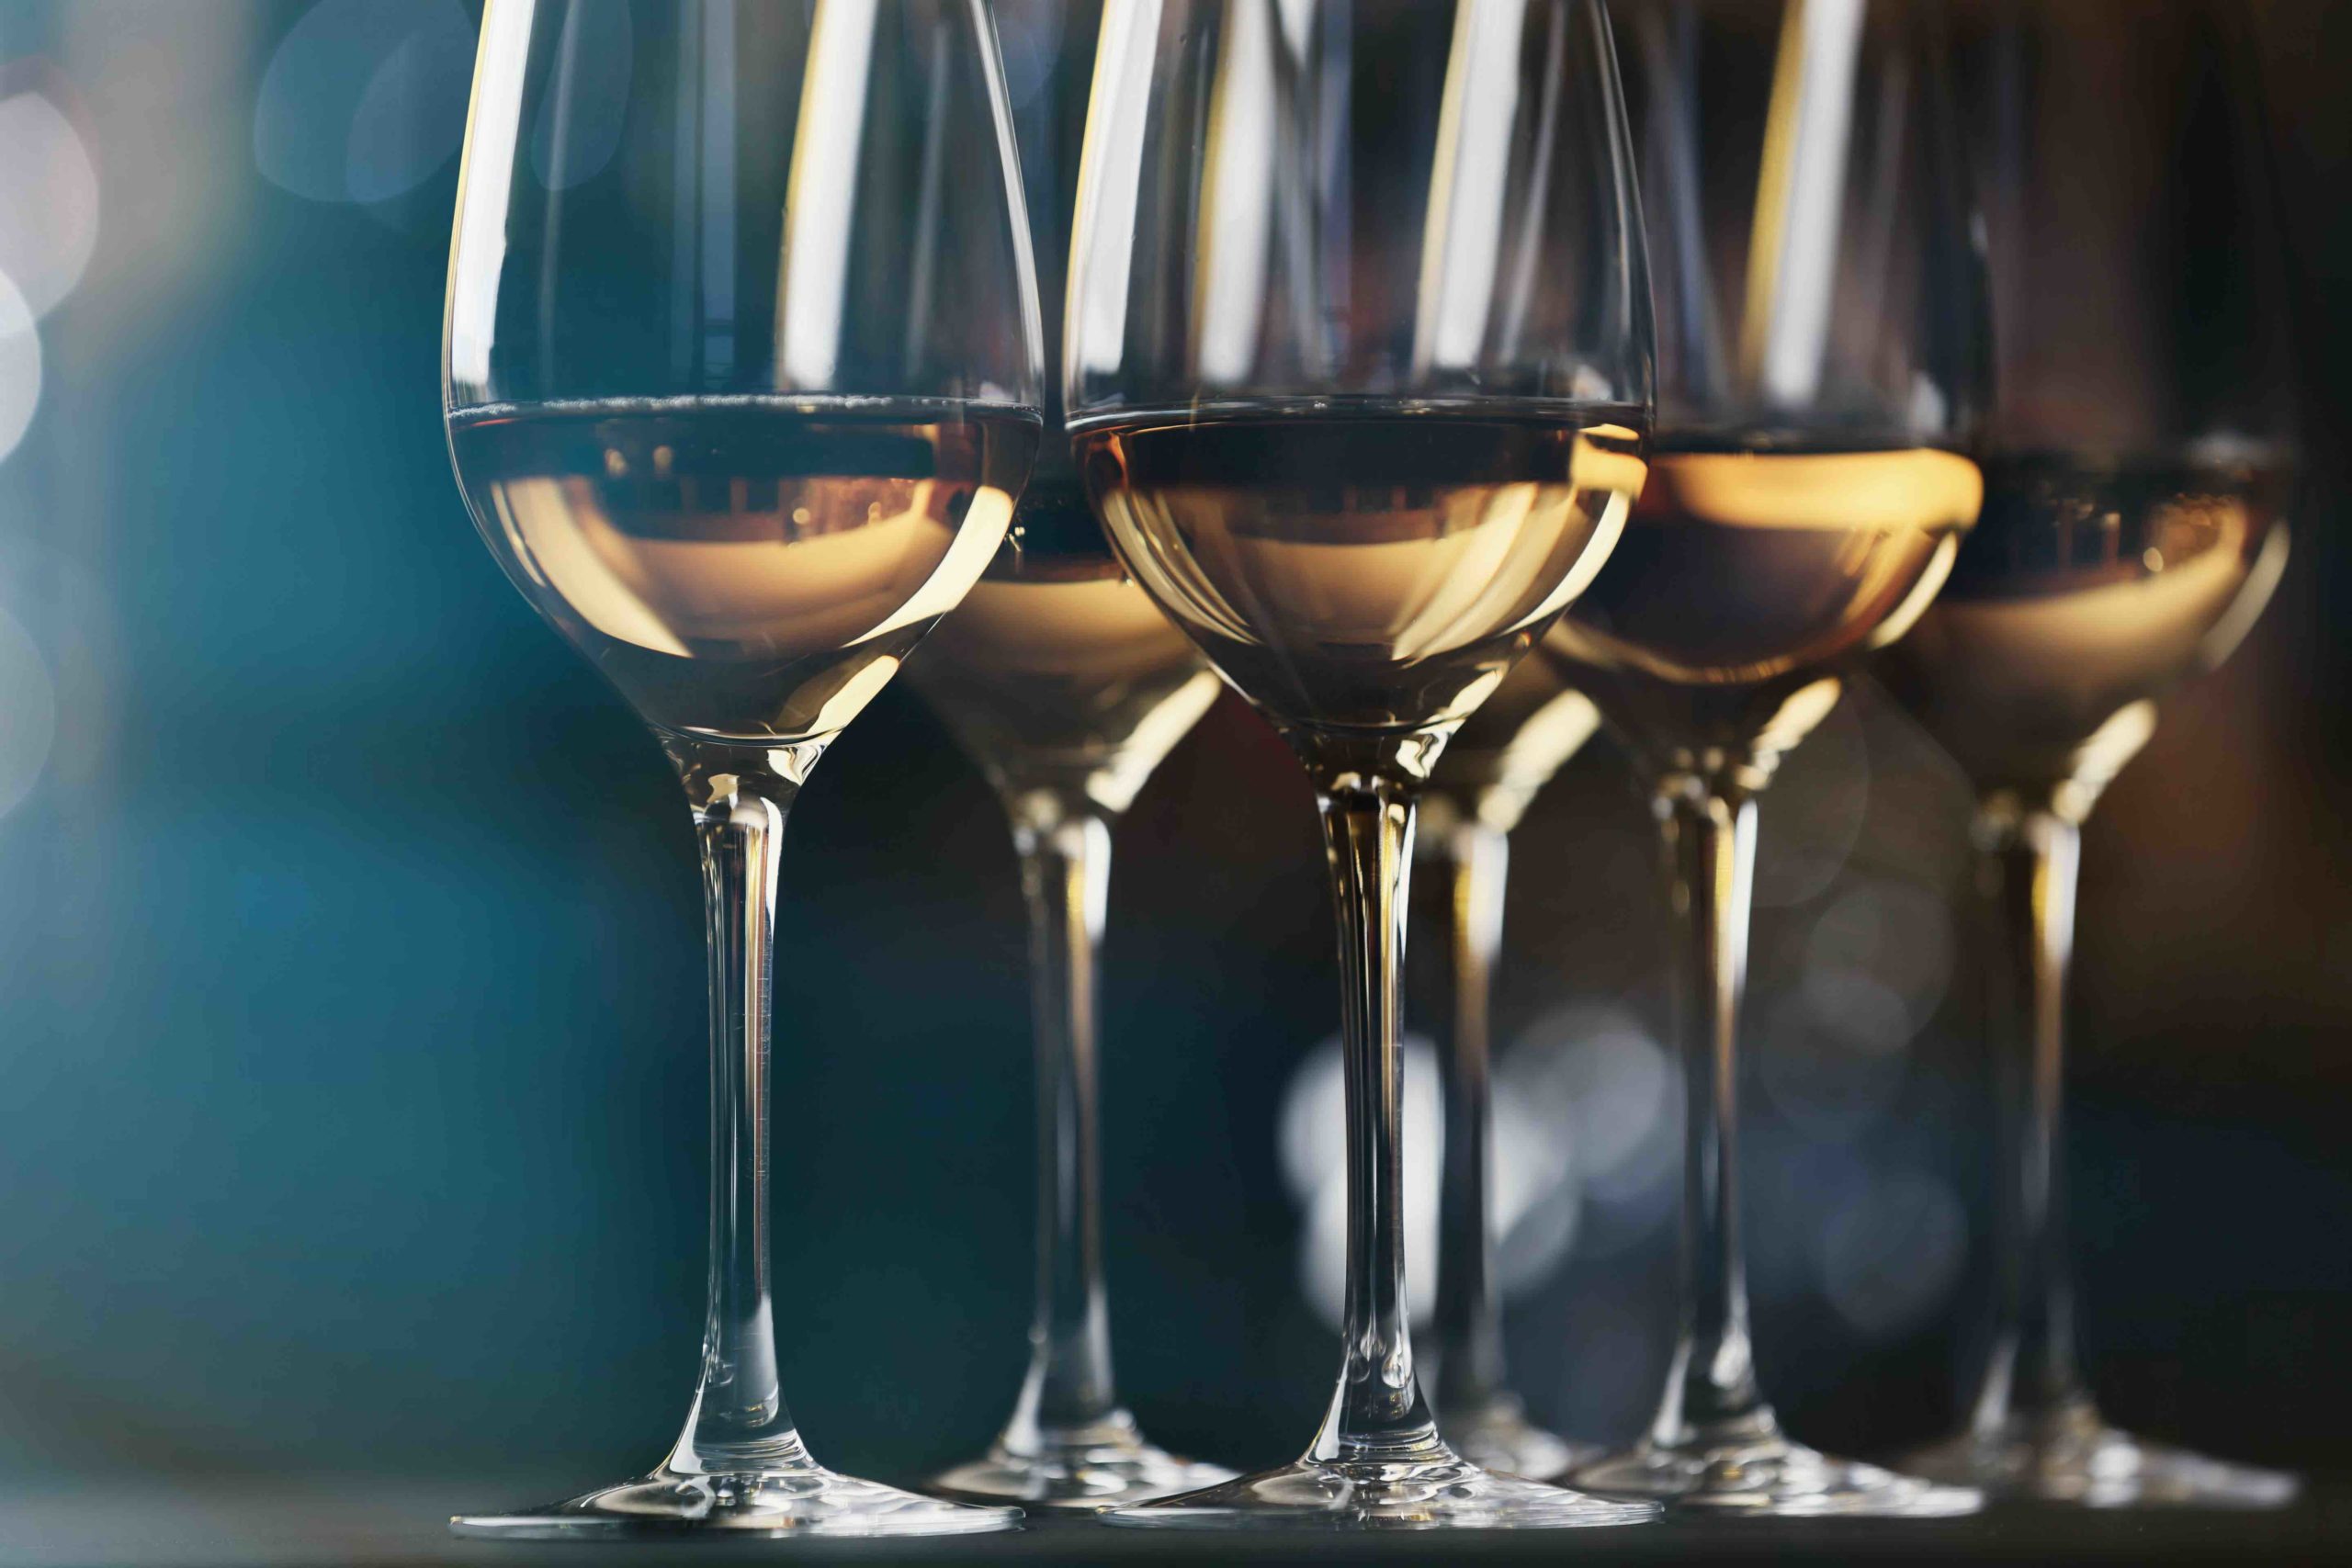 Sweet and fortified wines step into the limelight